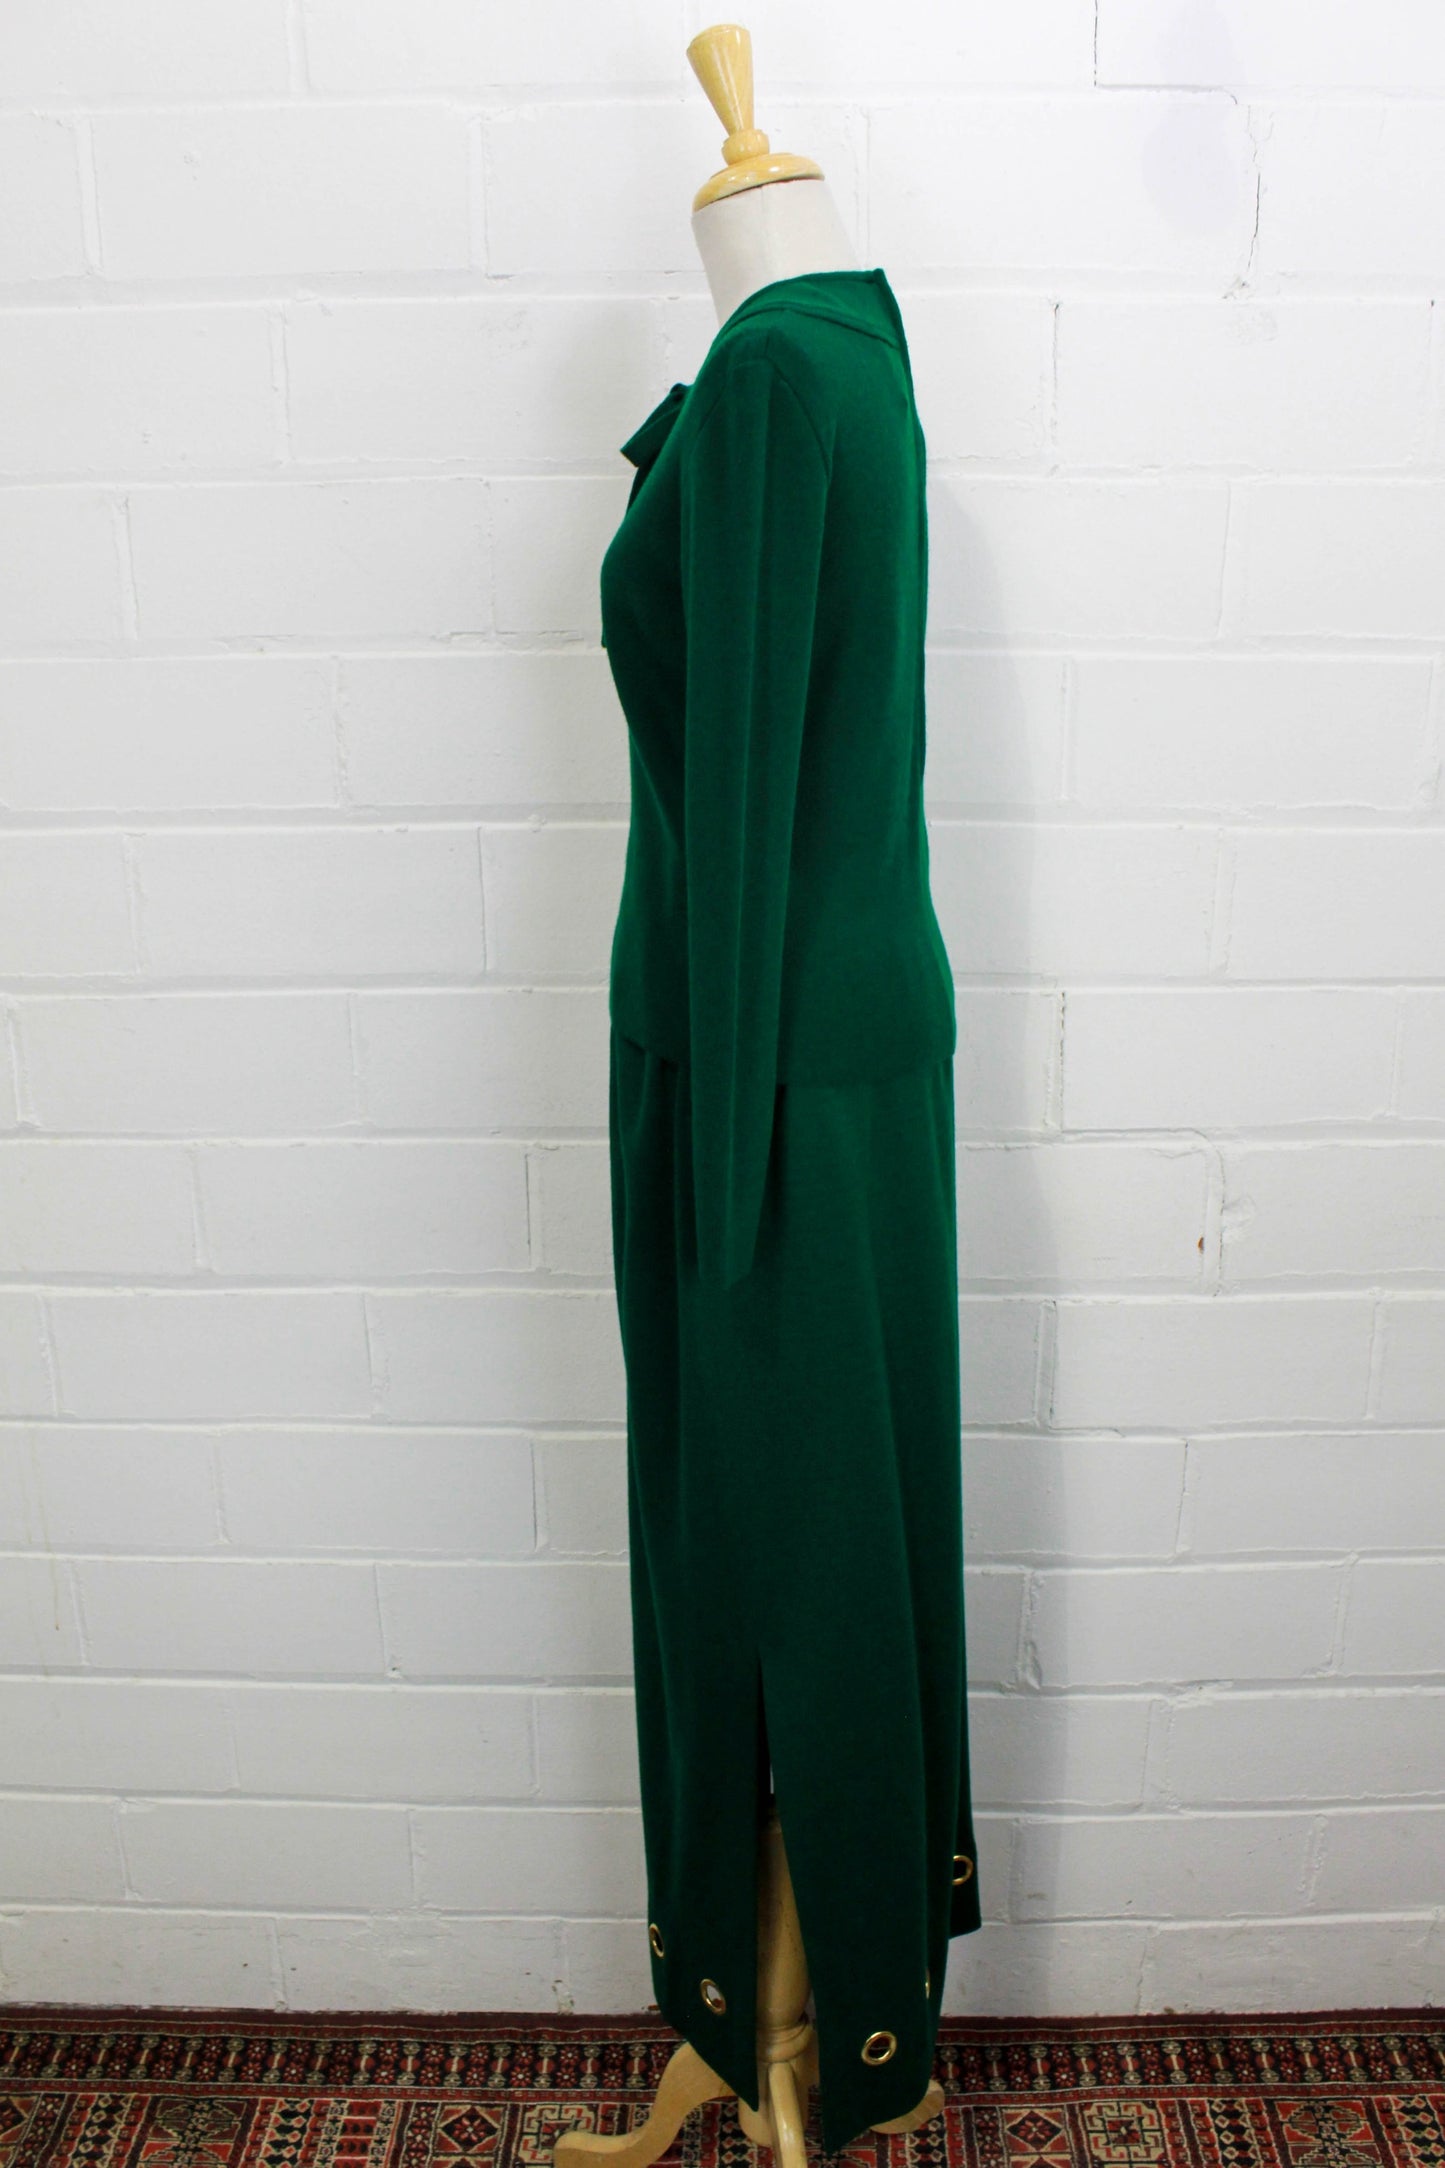 1970s Arbe Knits Skirt and Top Set, Grass Green, x2 Available, Small/Medium